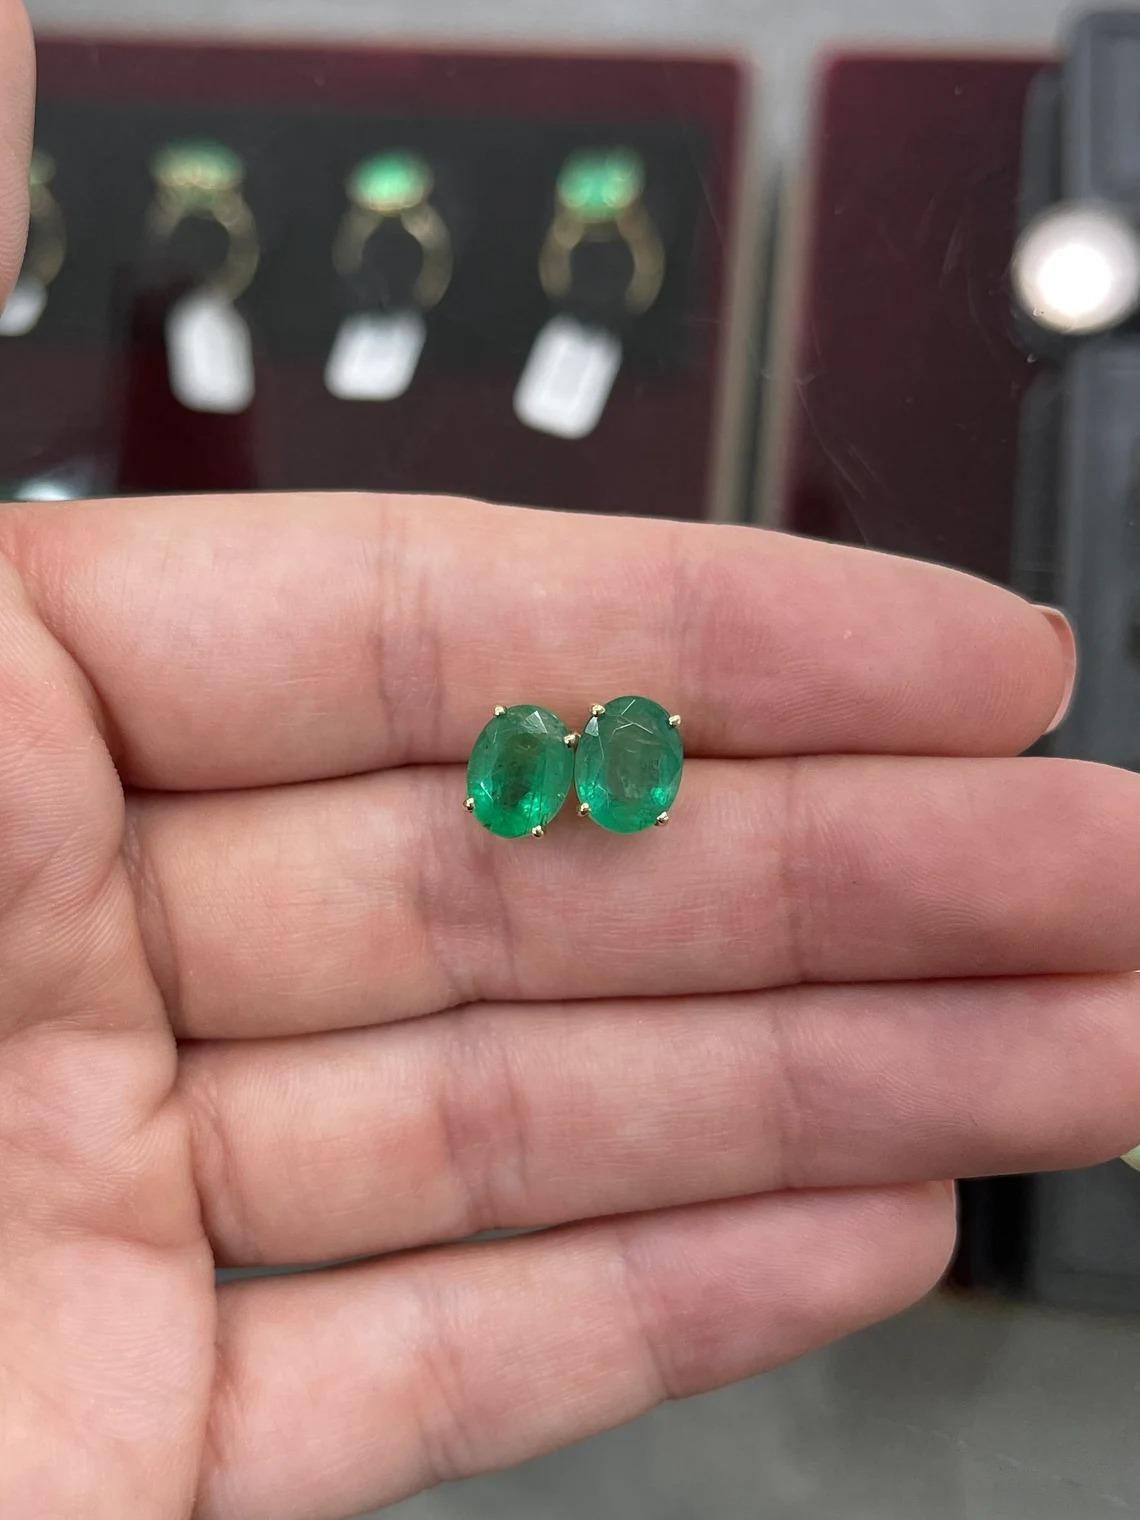 The perfect pair of natural emerald stud earrings. A full 4.08-carats combined, of beautiful Zambian emeralds, cut in the shape of an oval. The pair displays a beautiful medium green color, with good transparency and luster. Crafted in a 14K yellow